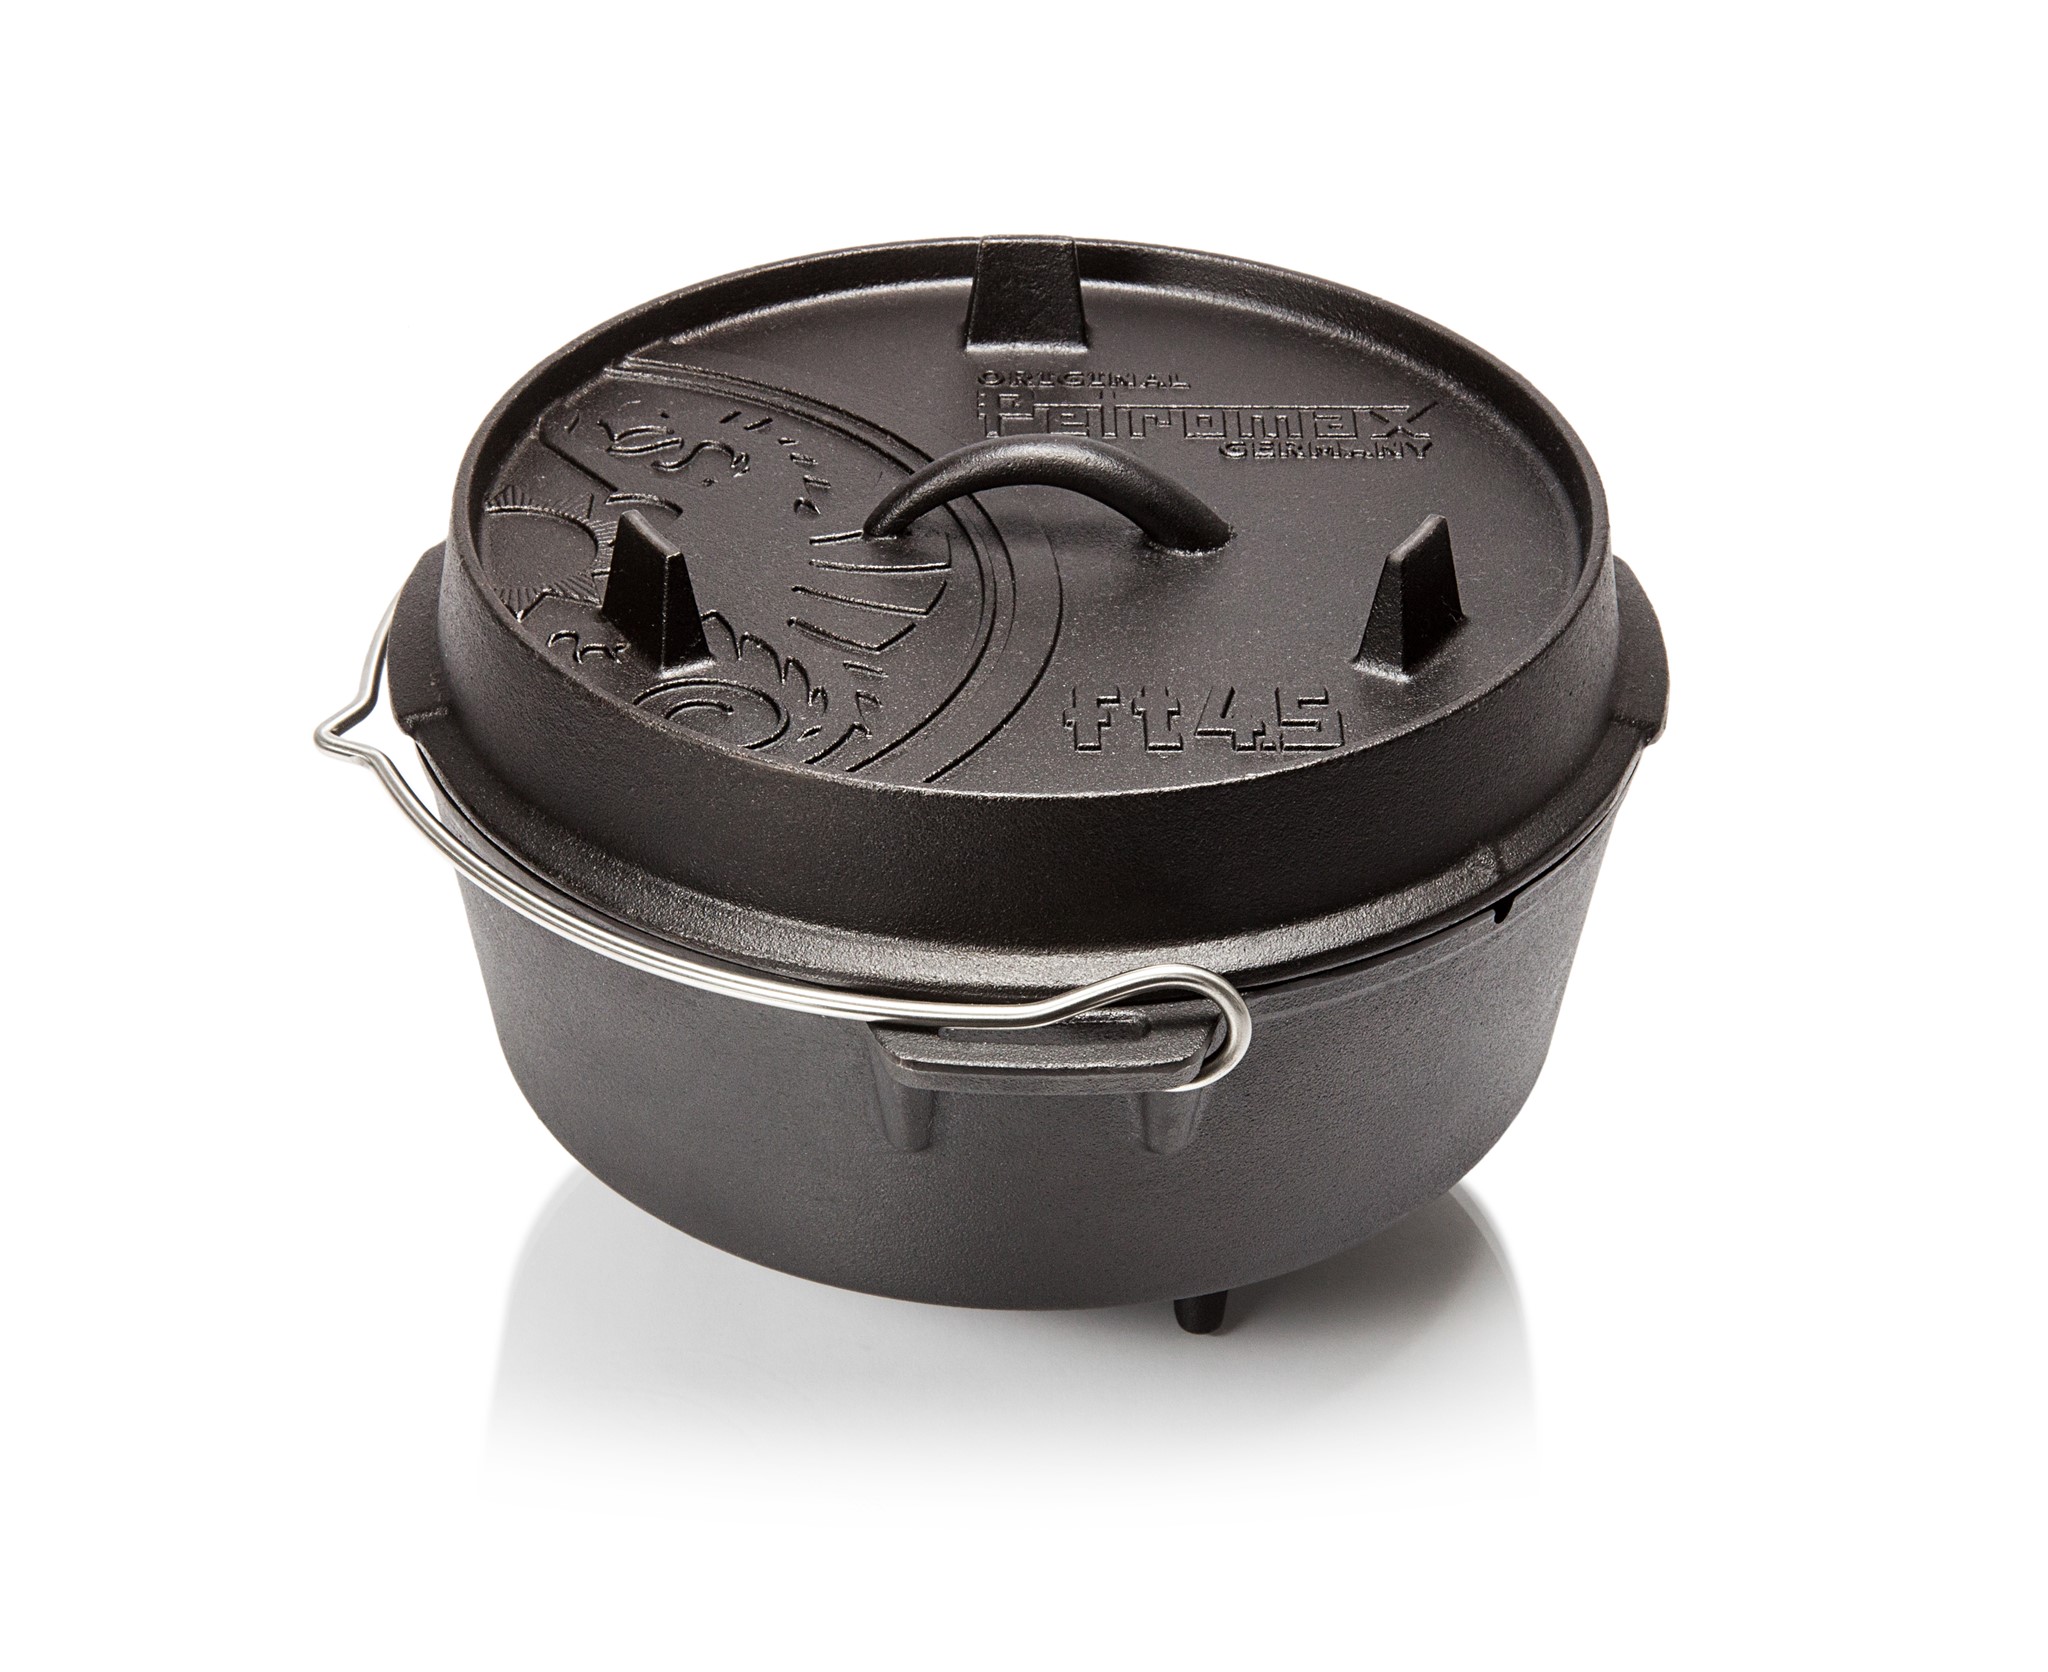 Picture of Petromax - Dutch Oven FT4.5 3.5 Liter (with Feet)